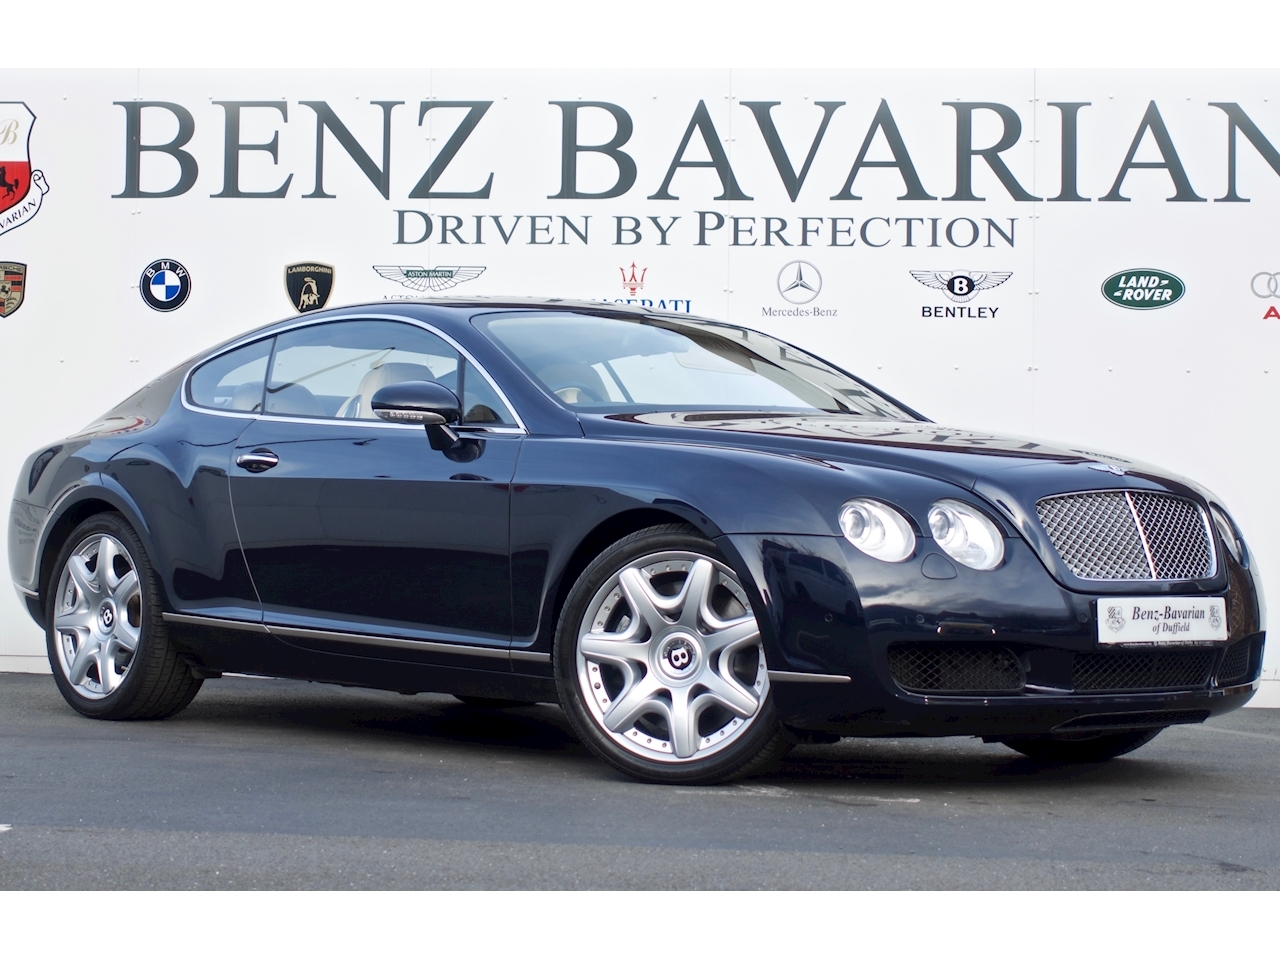 Continental Gt Coupe 6.0 Automatic Petrol Blue